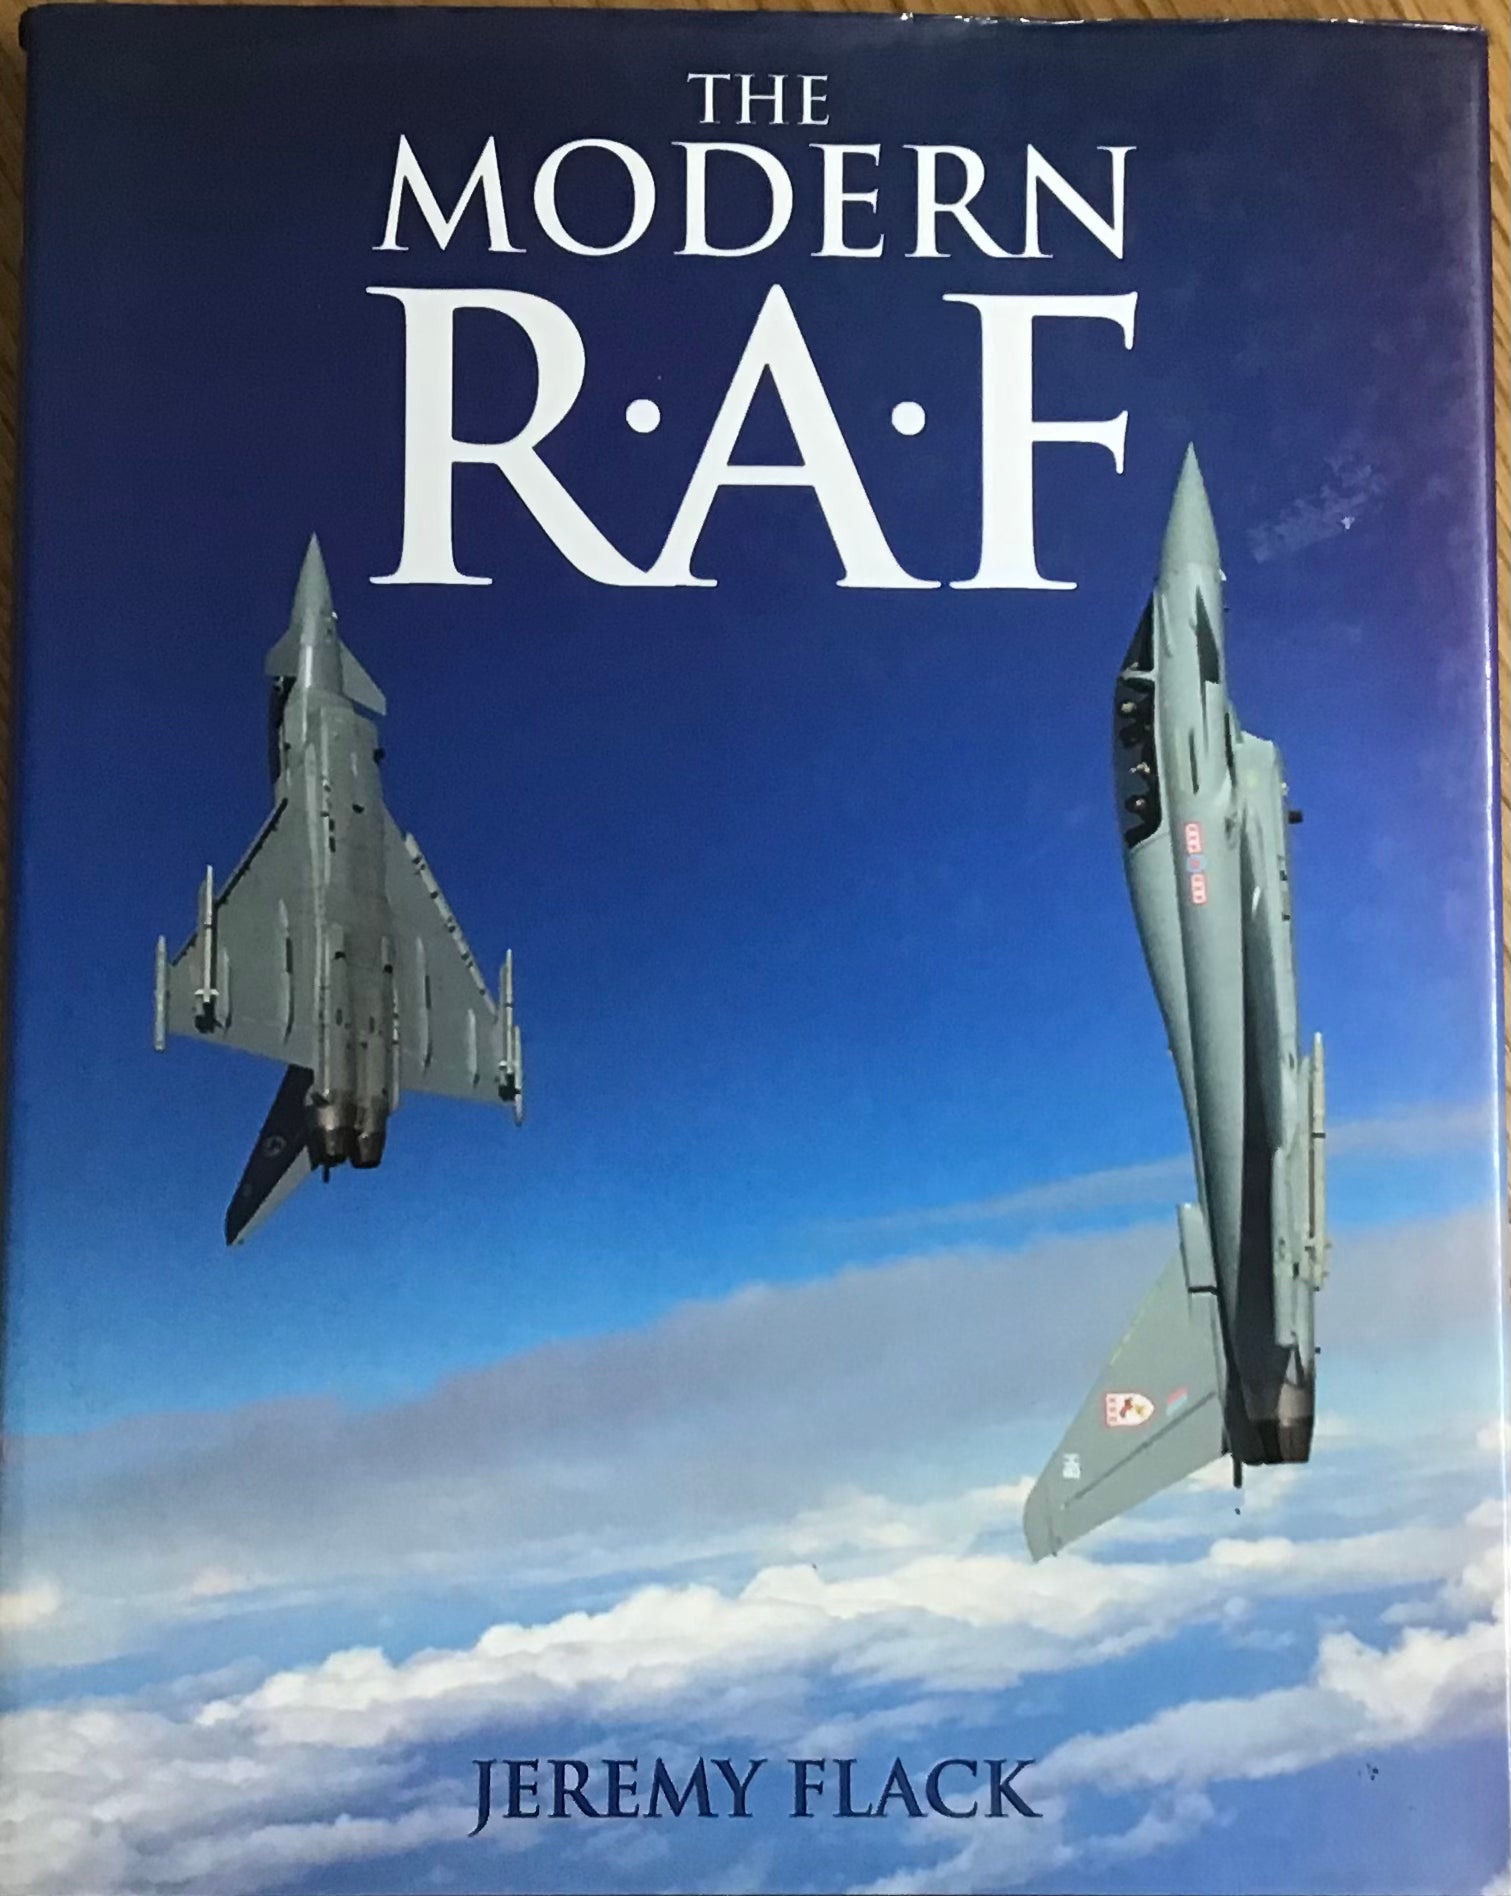 The Modern R.A.F by Jeremy Flack - Chester Model Centre